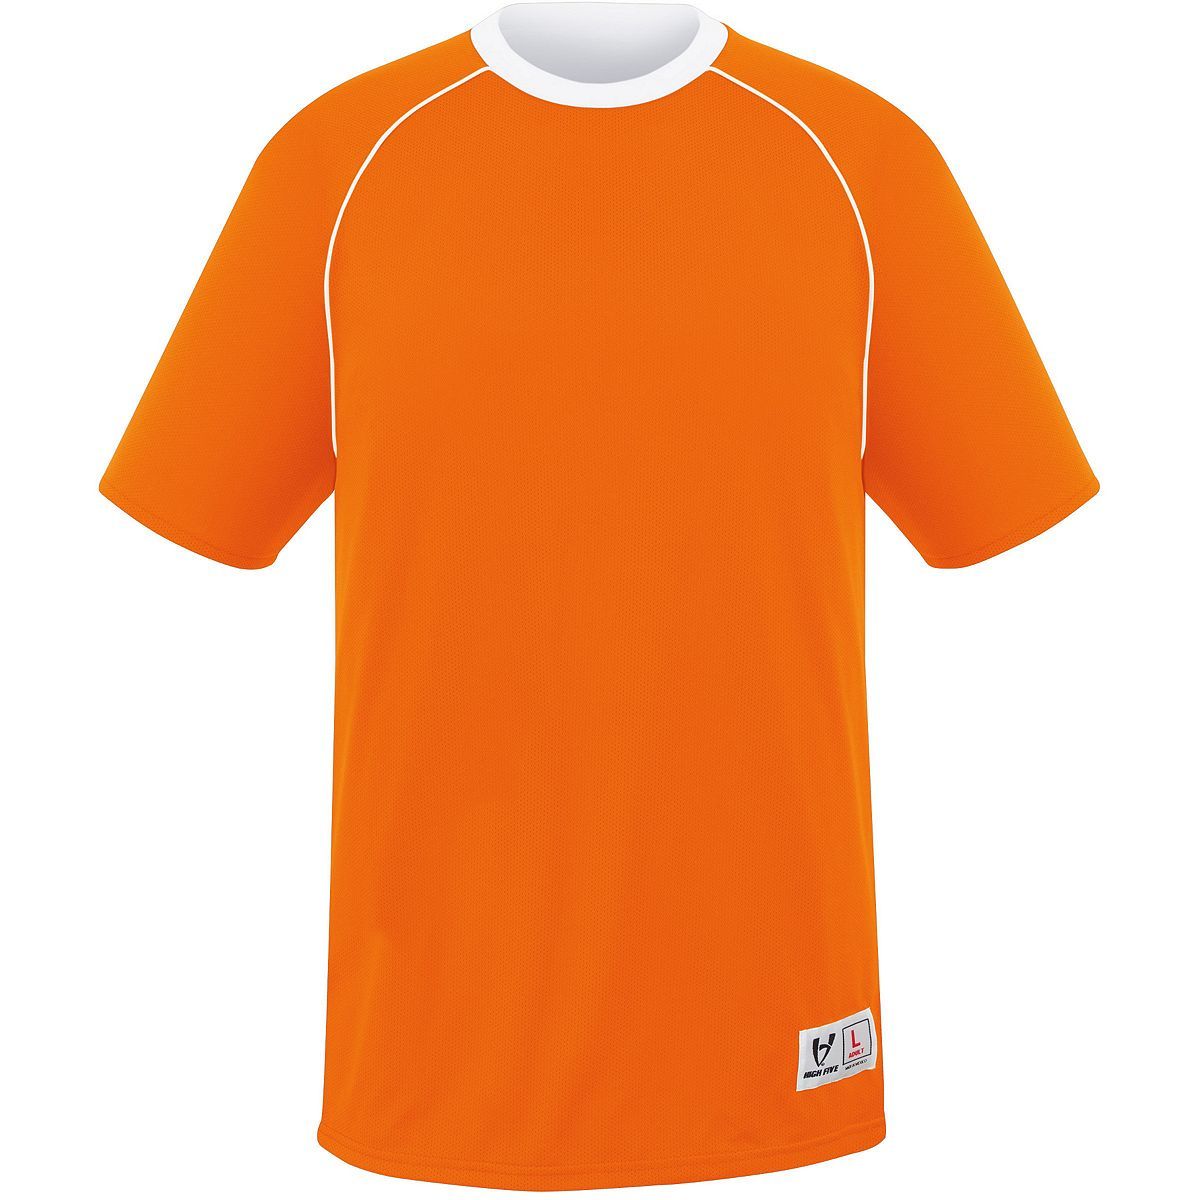 High 5 Conversion Reversible Jersey in Orange/White  -Part of the Adult, Adult-Jersey, High5-Products, Soccer, Shirts, All-Sports-1 product lines at KanaleyCreations.com